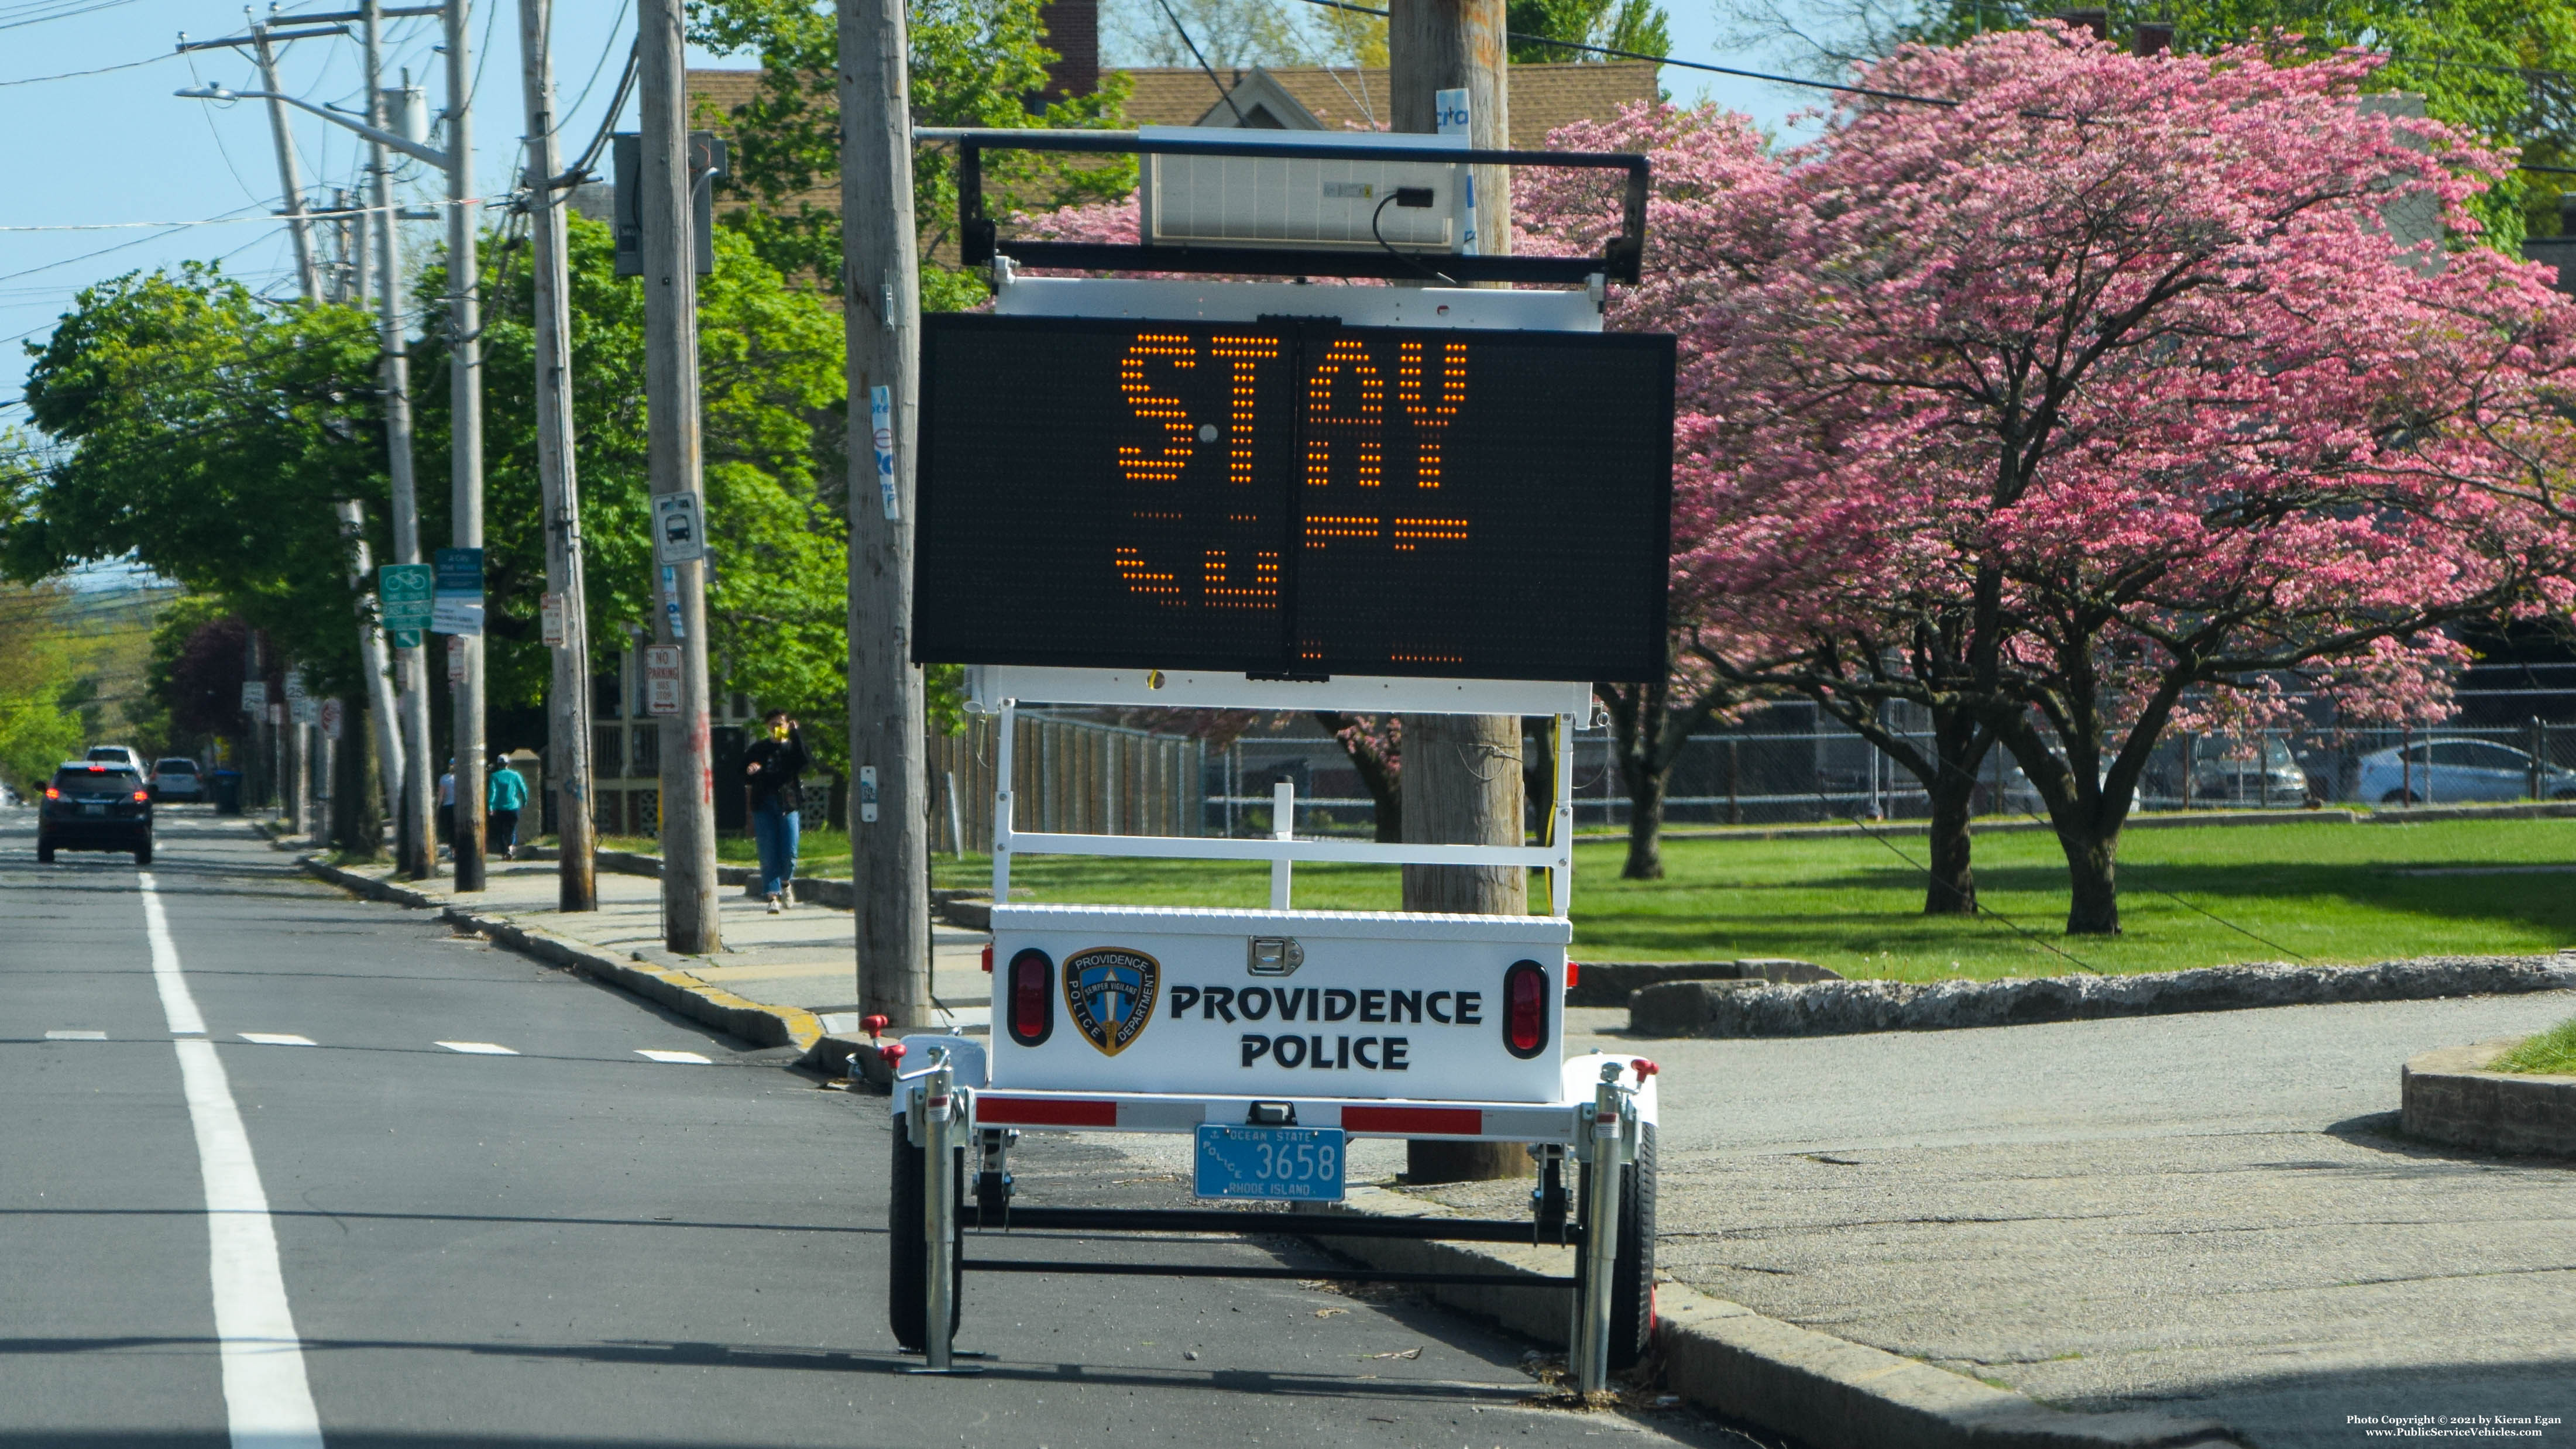 A photo  of Providence Police
            Message Trailer 3658, a 2006-2011 All Traffic Solutions Message Trailer             taken by Kieran Egan